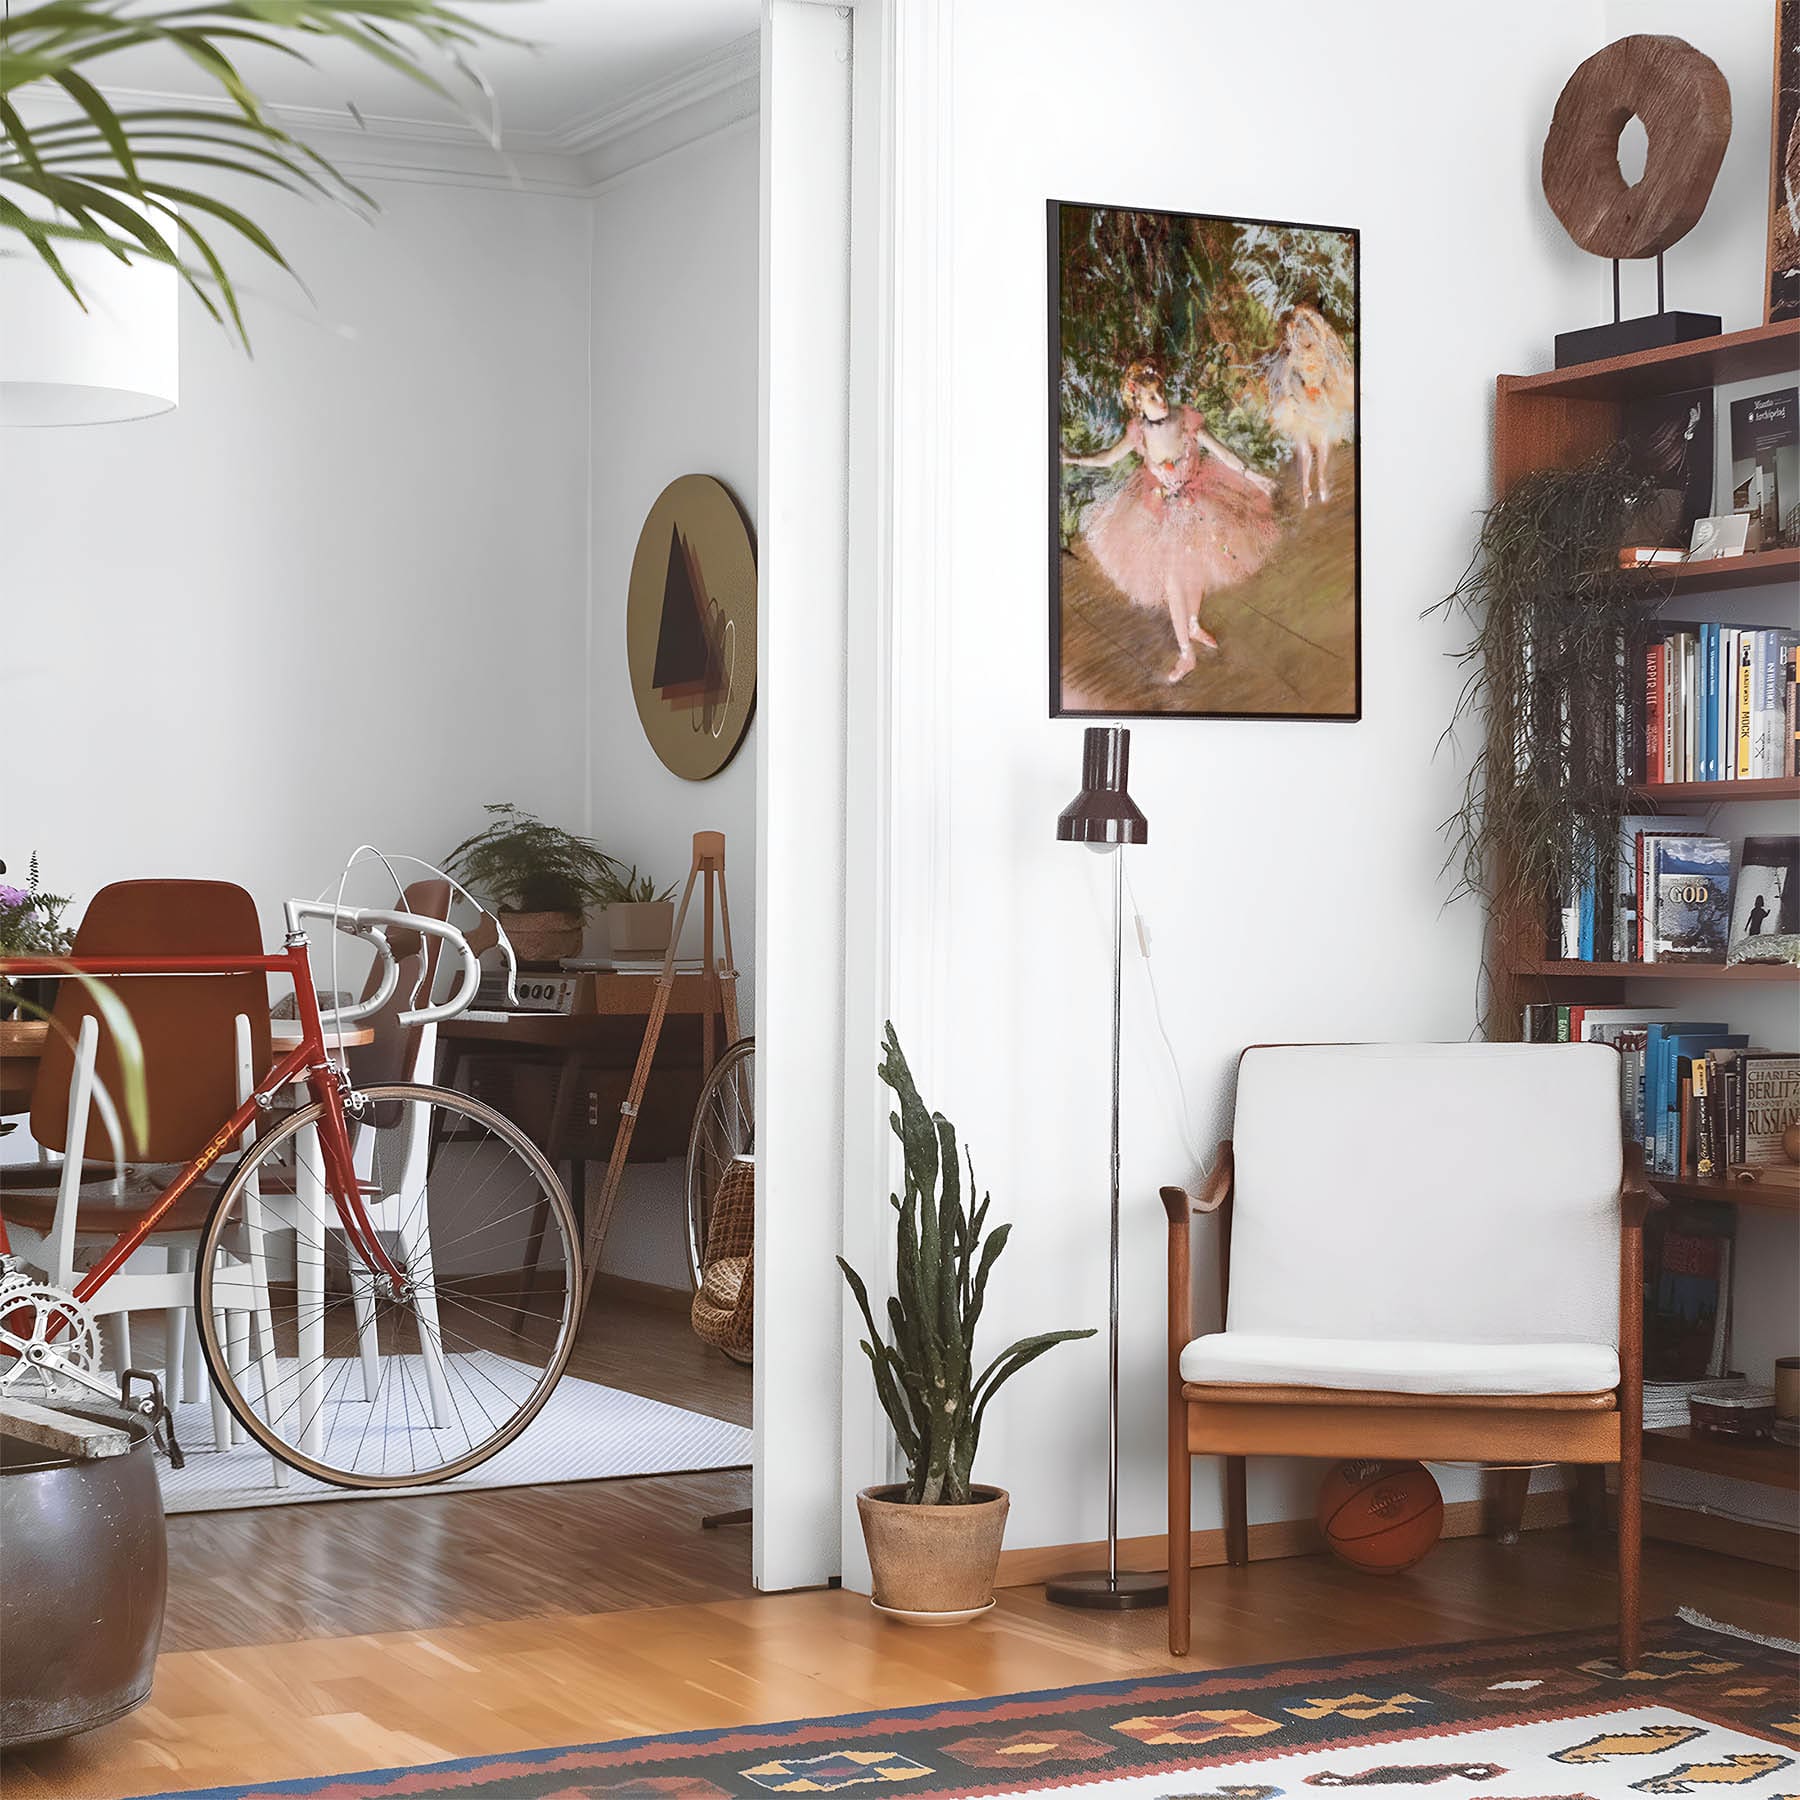 Eclectic living room with a road bike, bookshelf and house plants that features framed artwork of a Impressionist Ballet above a chair and lamp